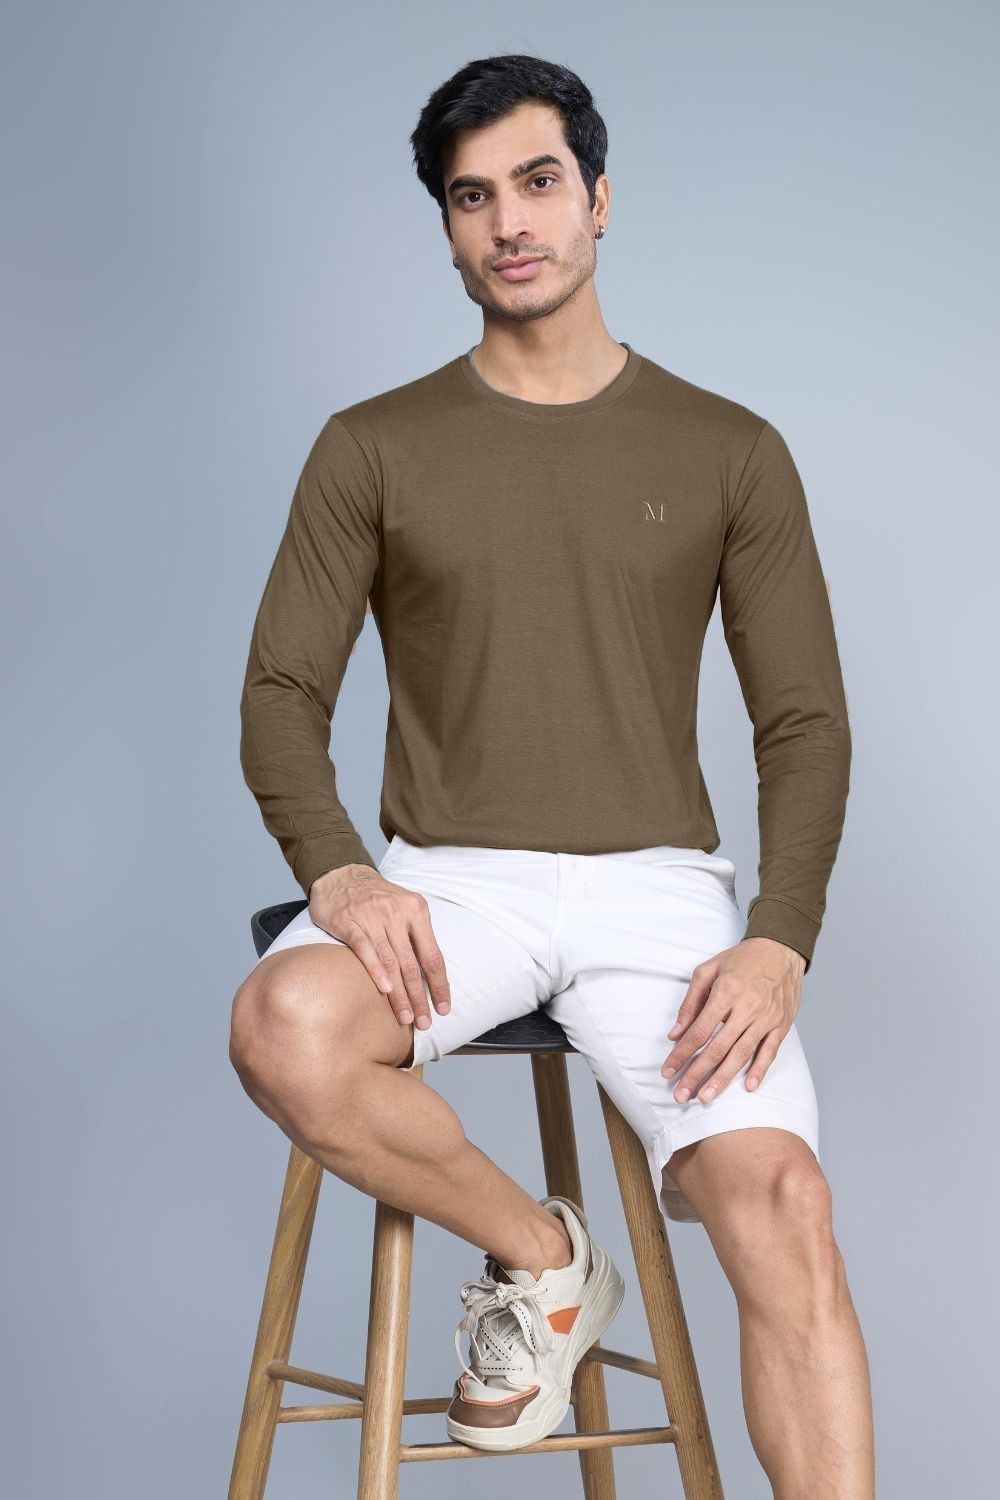 Teak colored, full sleeve solid T shirt for Men with round neck.